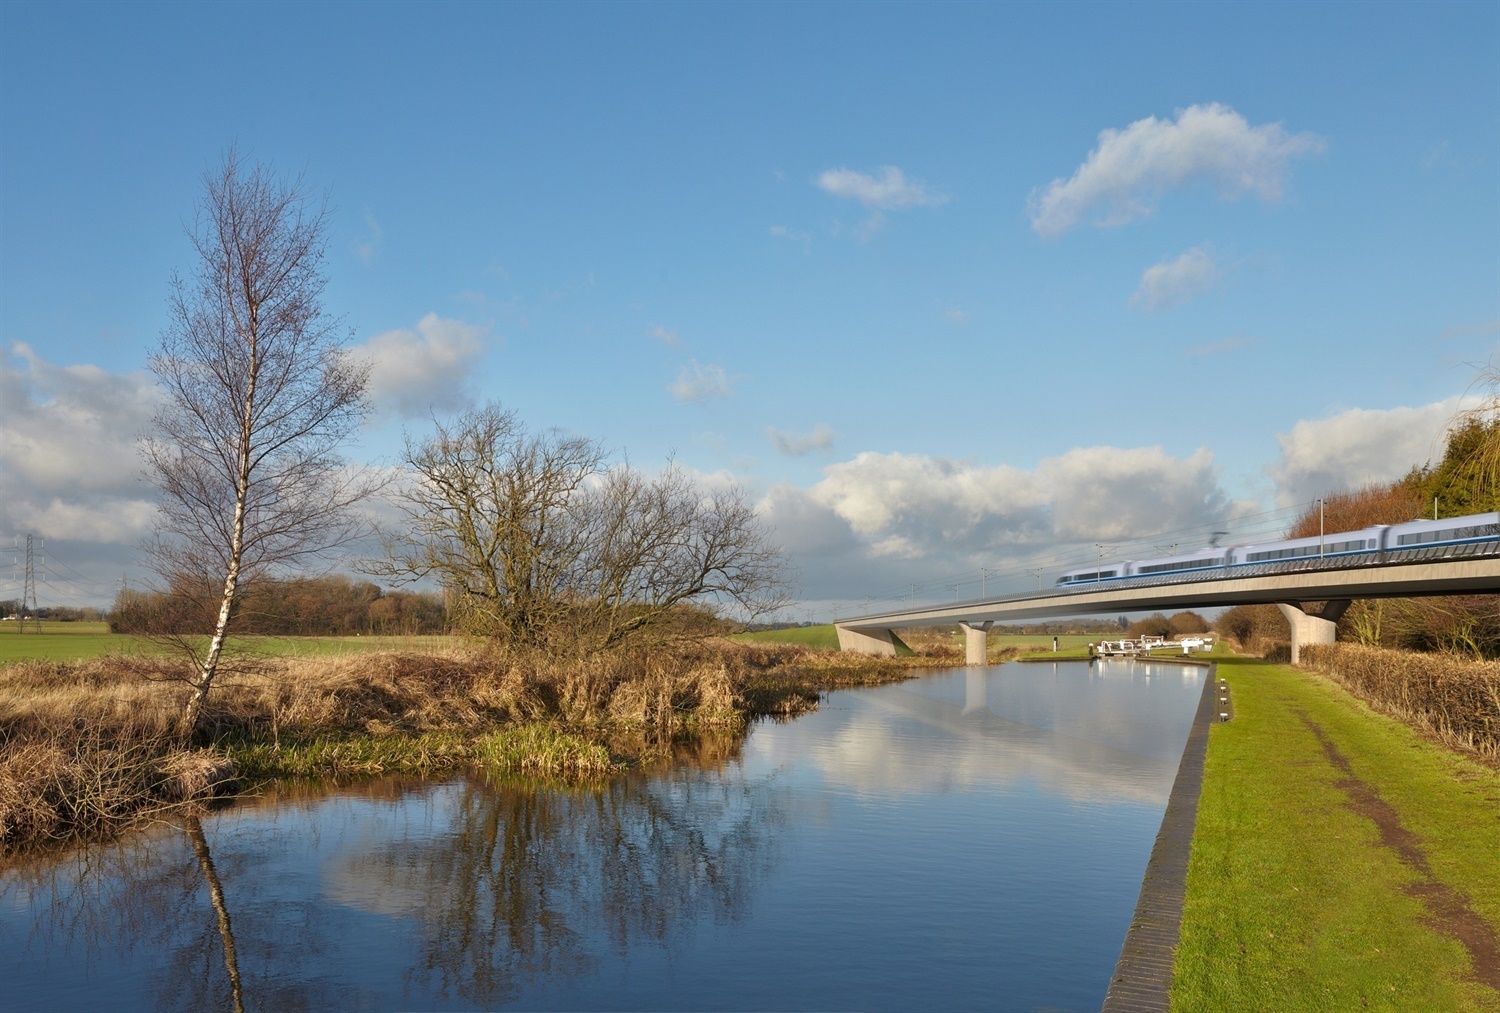 HS2 unveils chosen phase 2 route and £900m enabling works